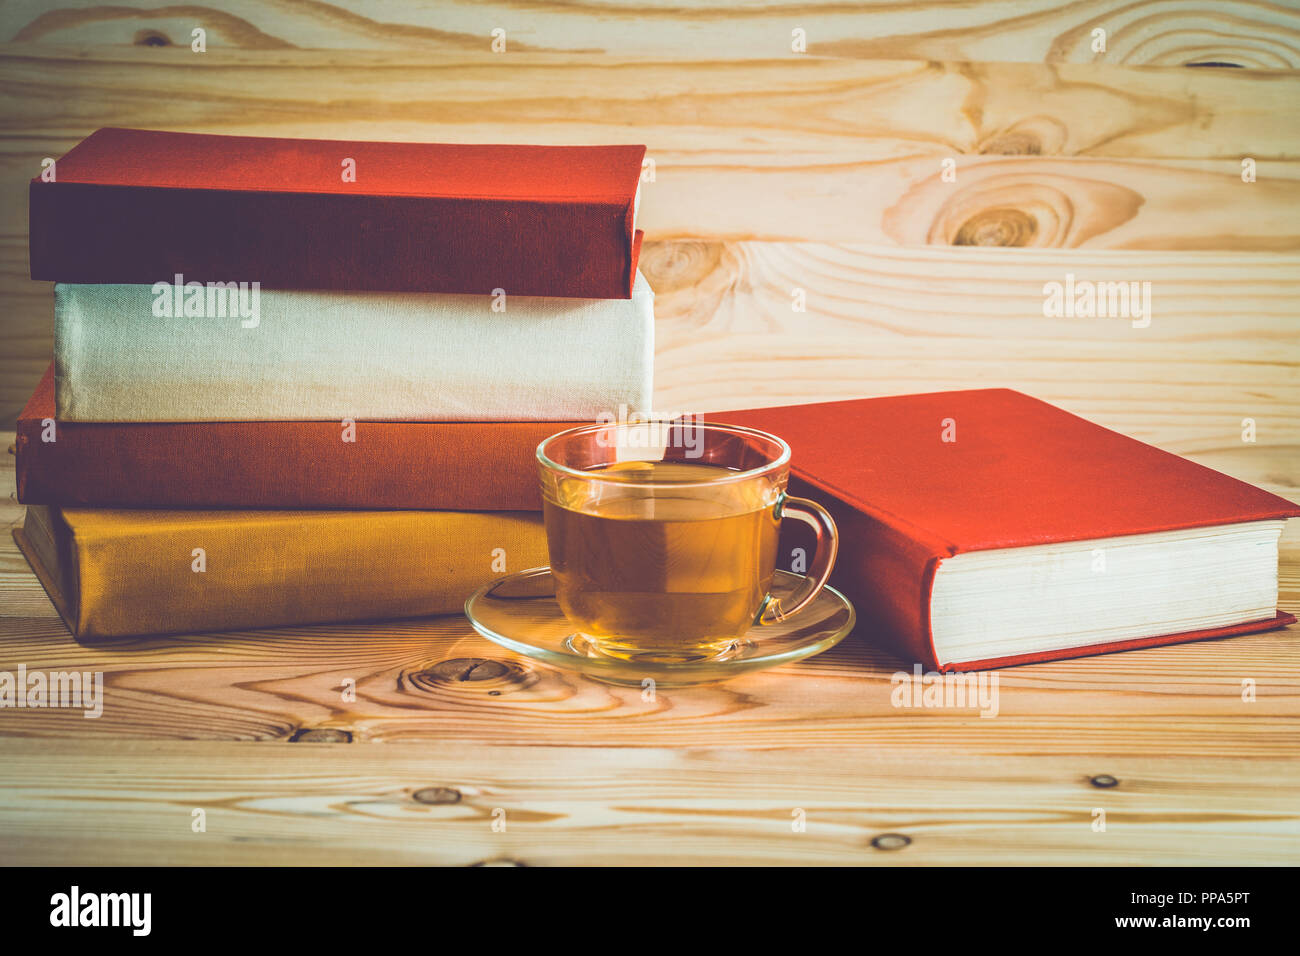 Glass Cup With Tea And A Stack Of Books With Colorful Covers